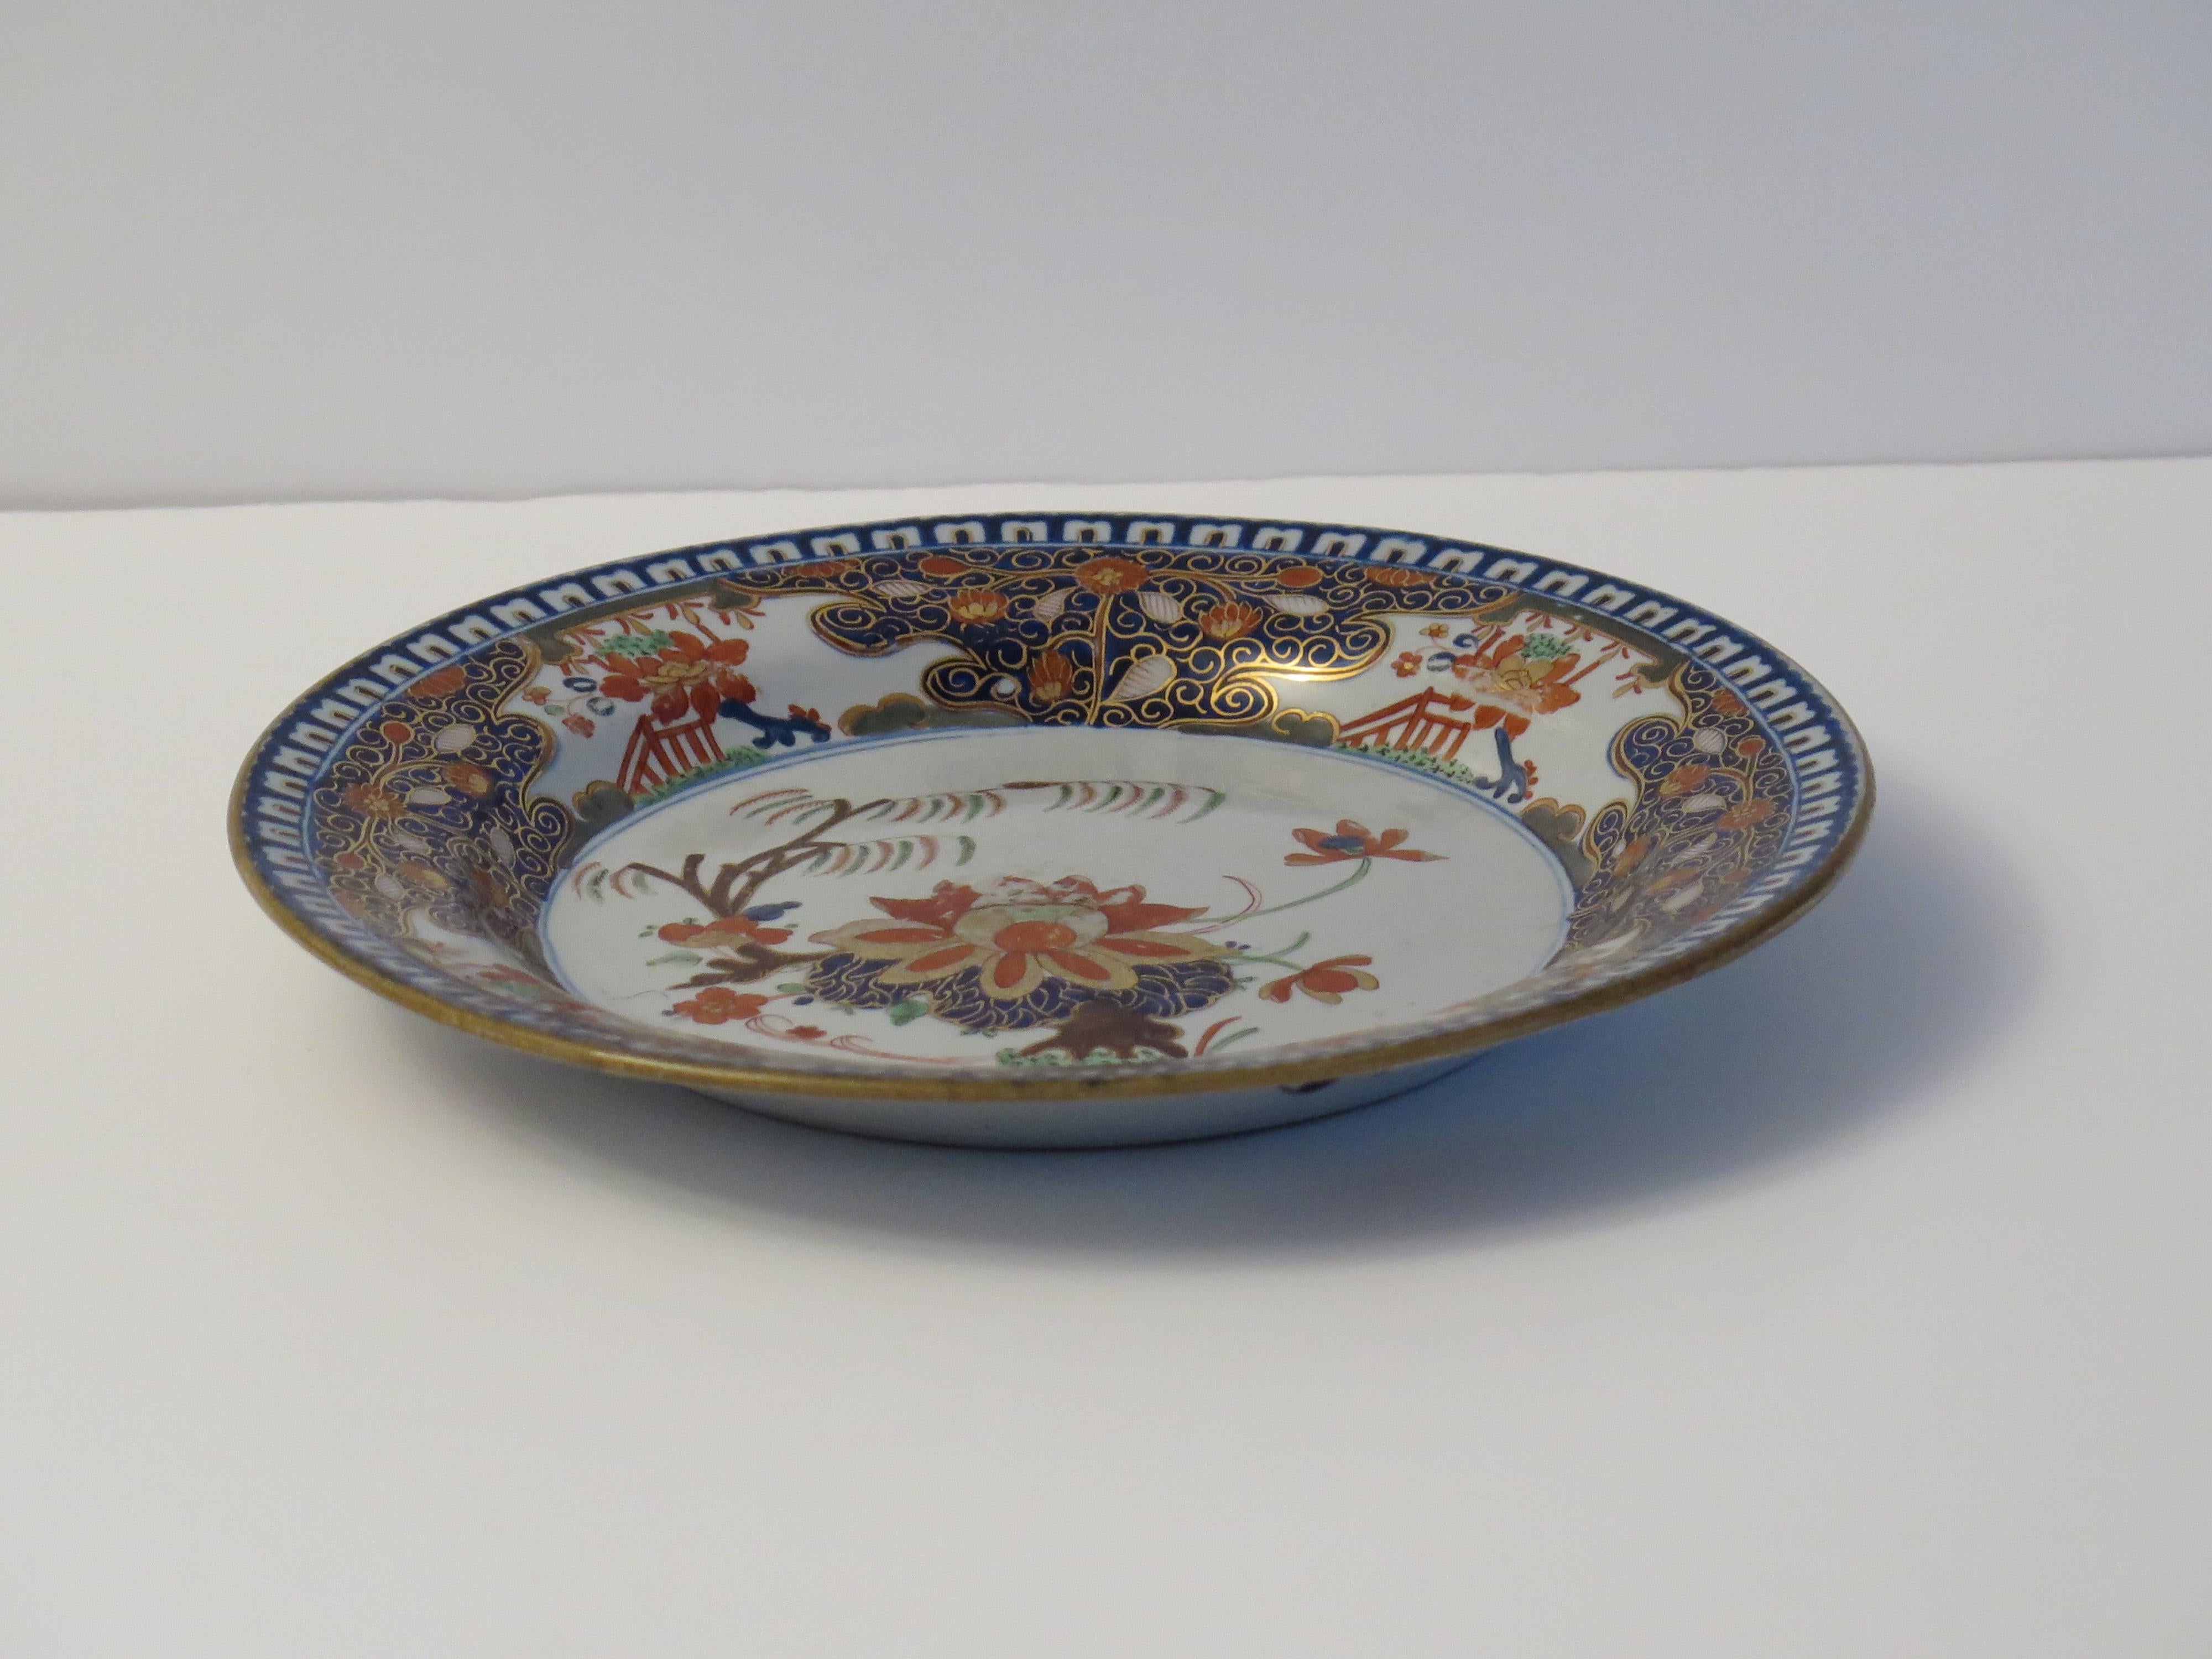 This is a finely hand painted Stone China ( Ironstone) Plate or Dish made by John Turner of Lane End, Staffordshire very early in the 19th Century, Circa 1800 to 1806.

The piece is well potted as a footed dish or plate.

The pattern is beautifully